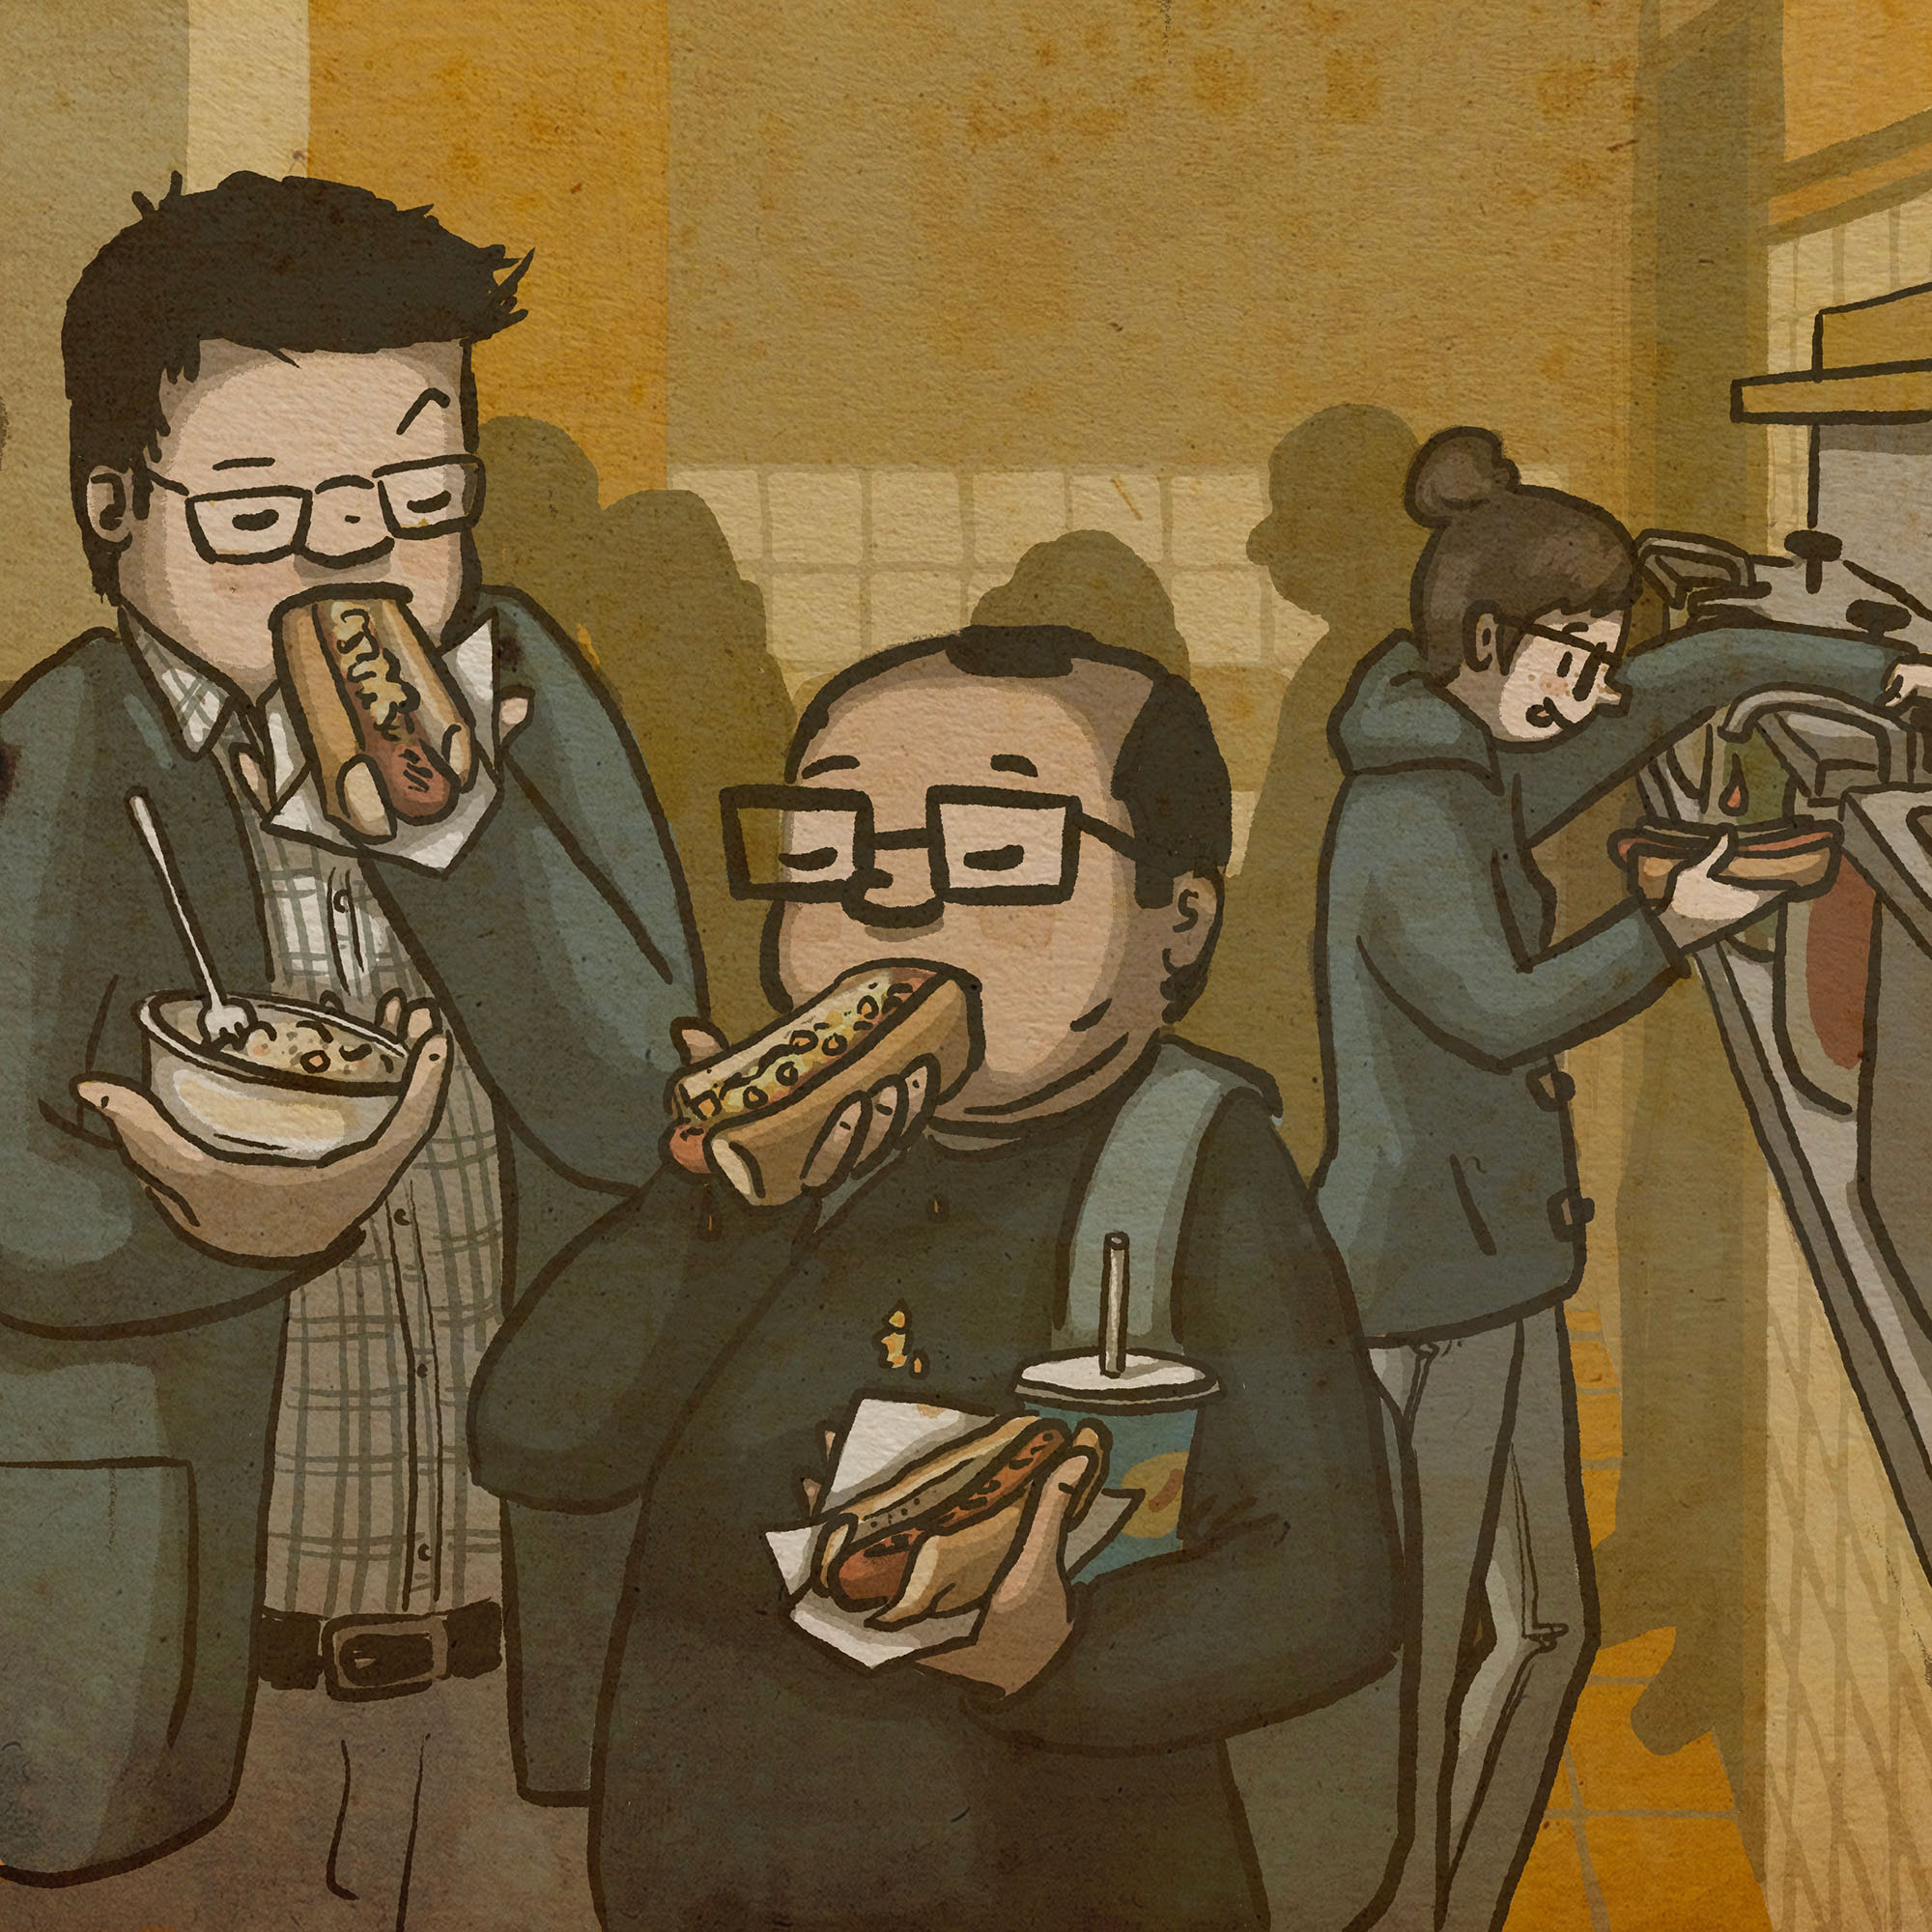 Illustration of two men eating hot dogs standing up, inside the hot dog shop. Behind them, a woman adds ketchup to her hot dog.